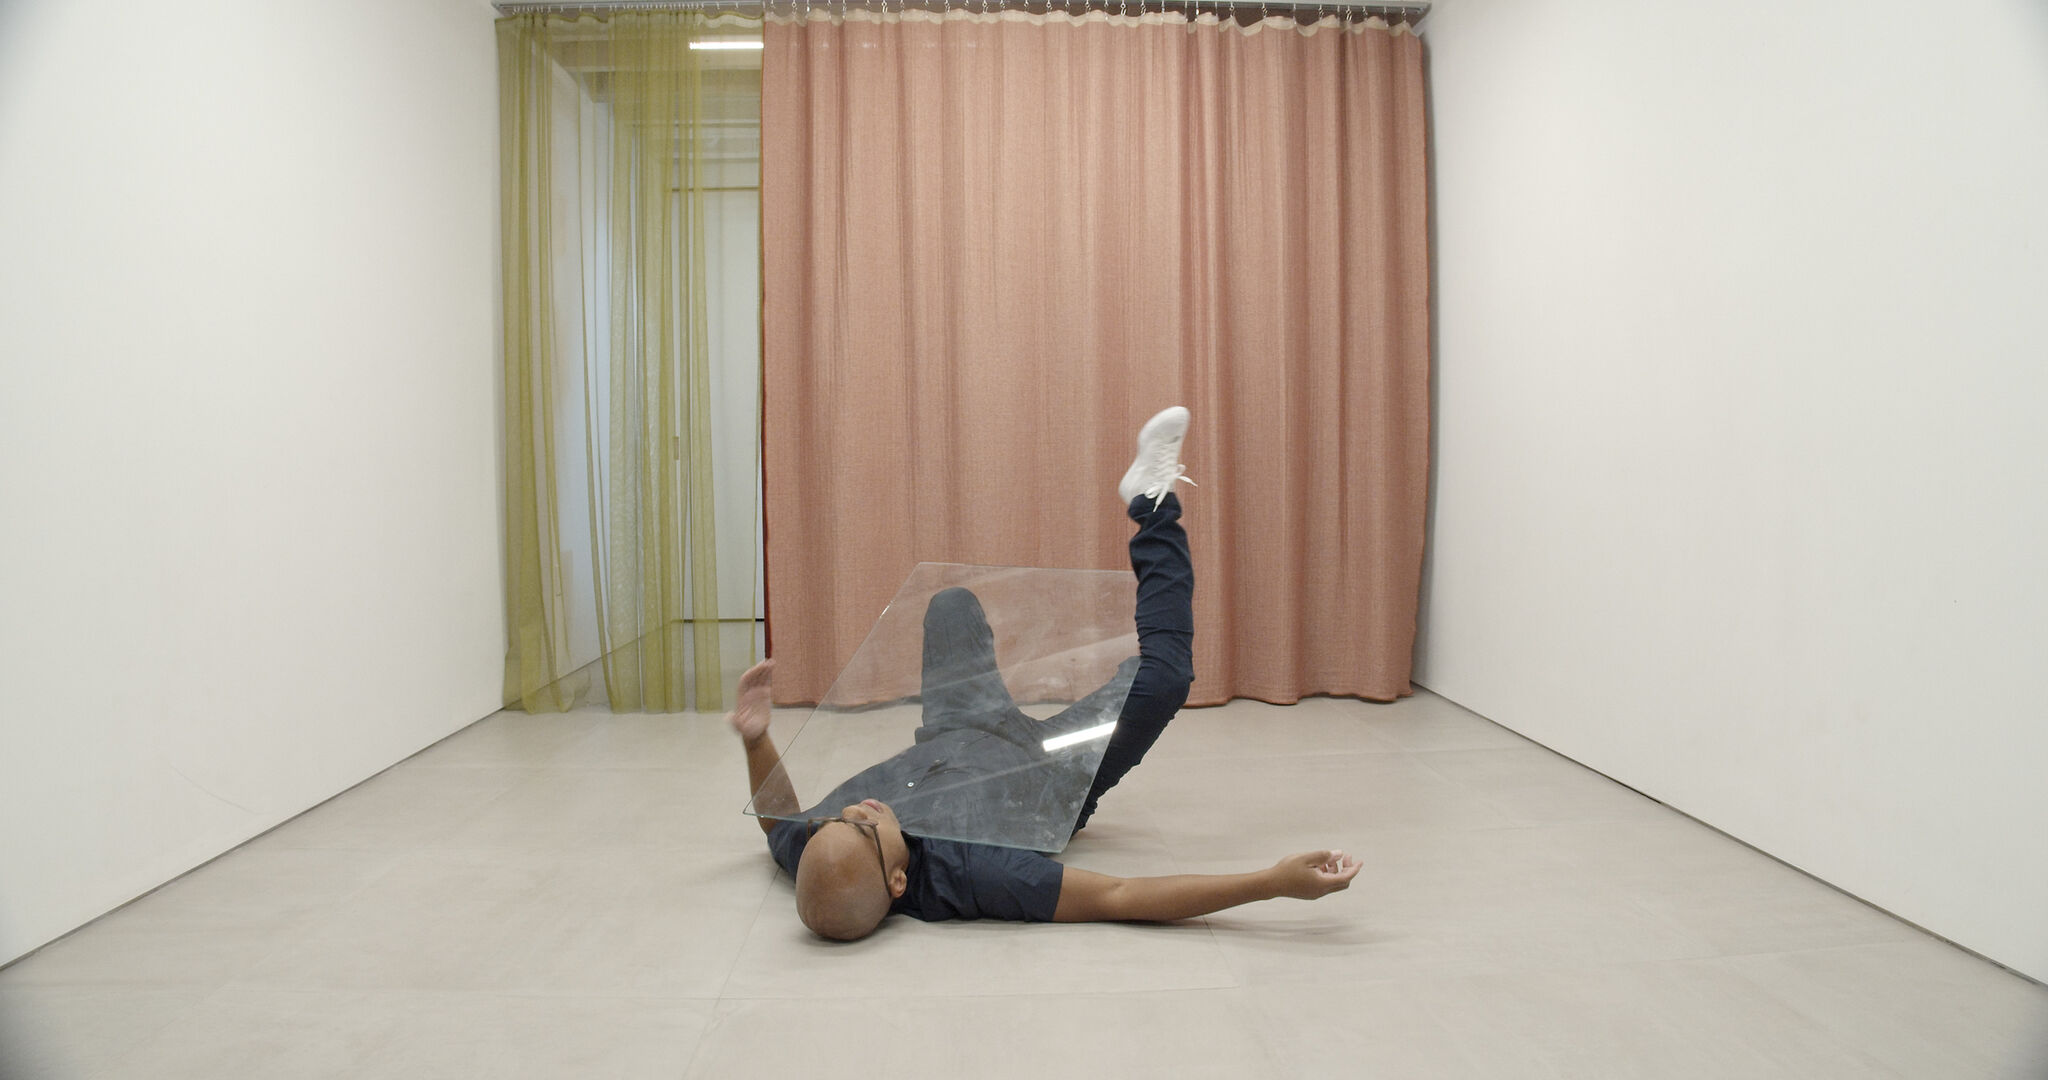 A person in a room is lying face-up on the floor with limbs akimbo and beneath a pane of glass.